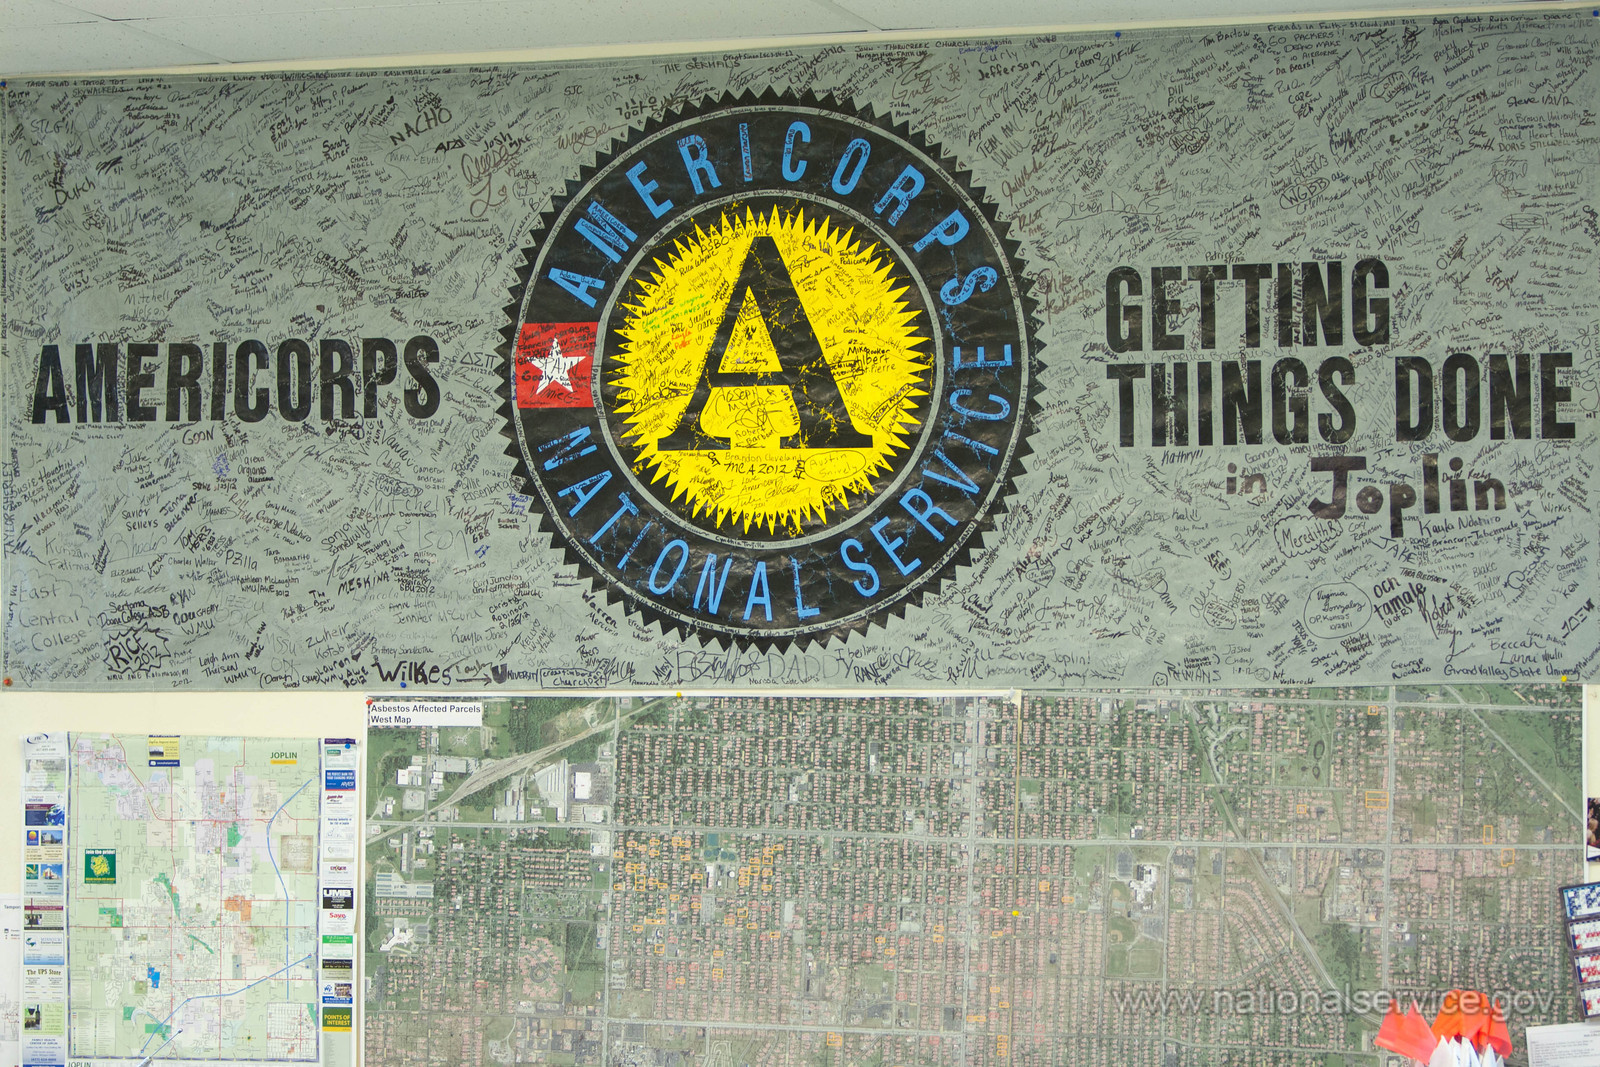 Old AmeriCorps logo on a wall with "Getting Things Done" text adjacent